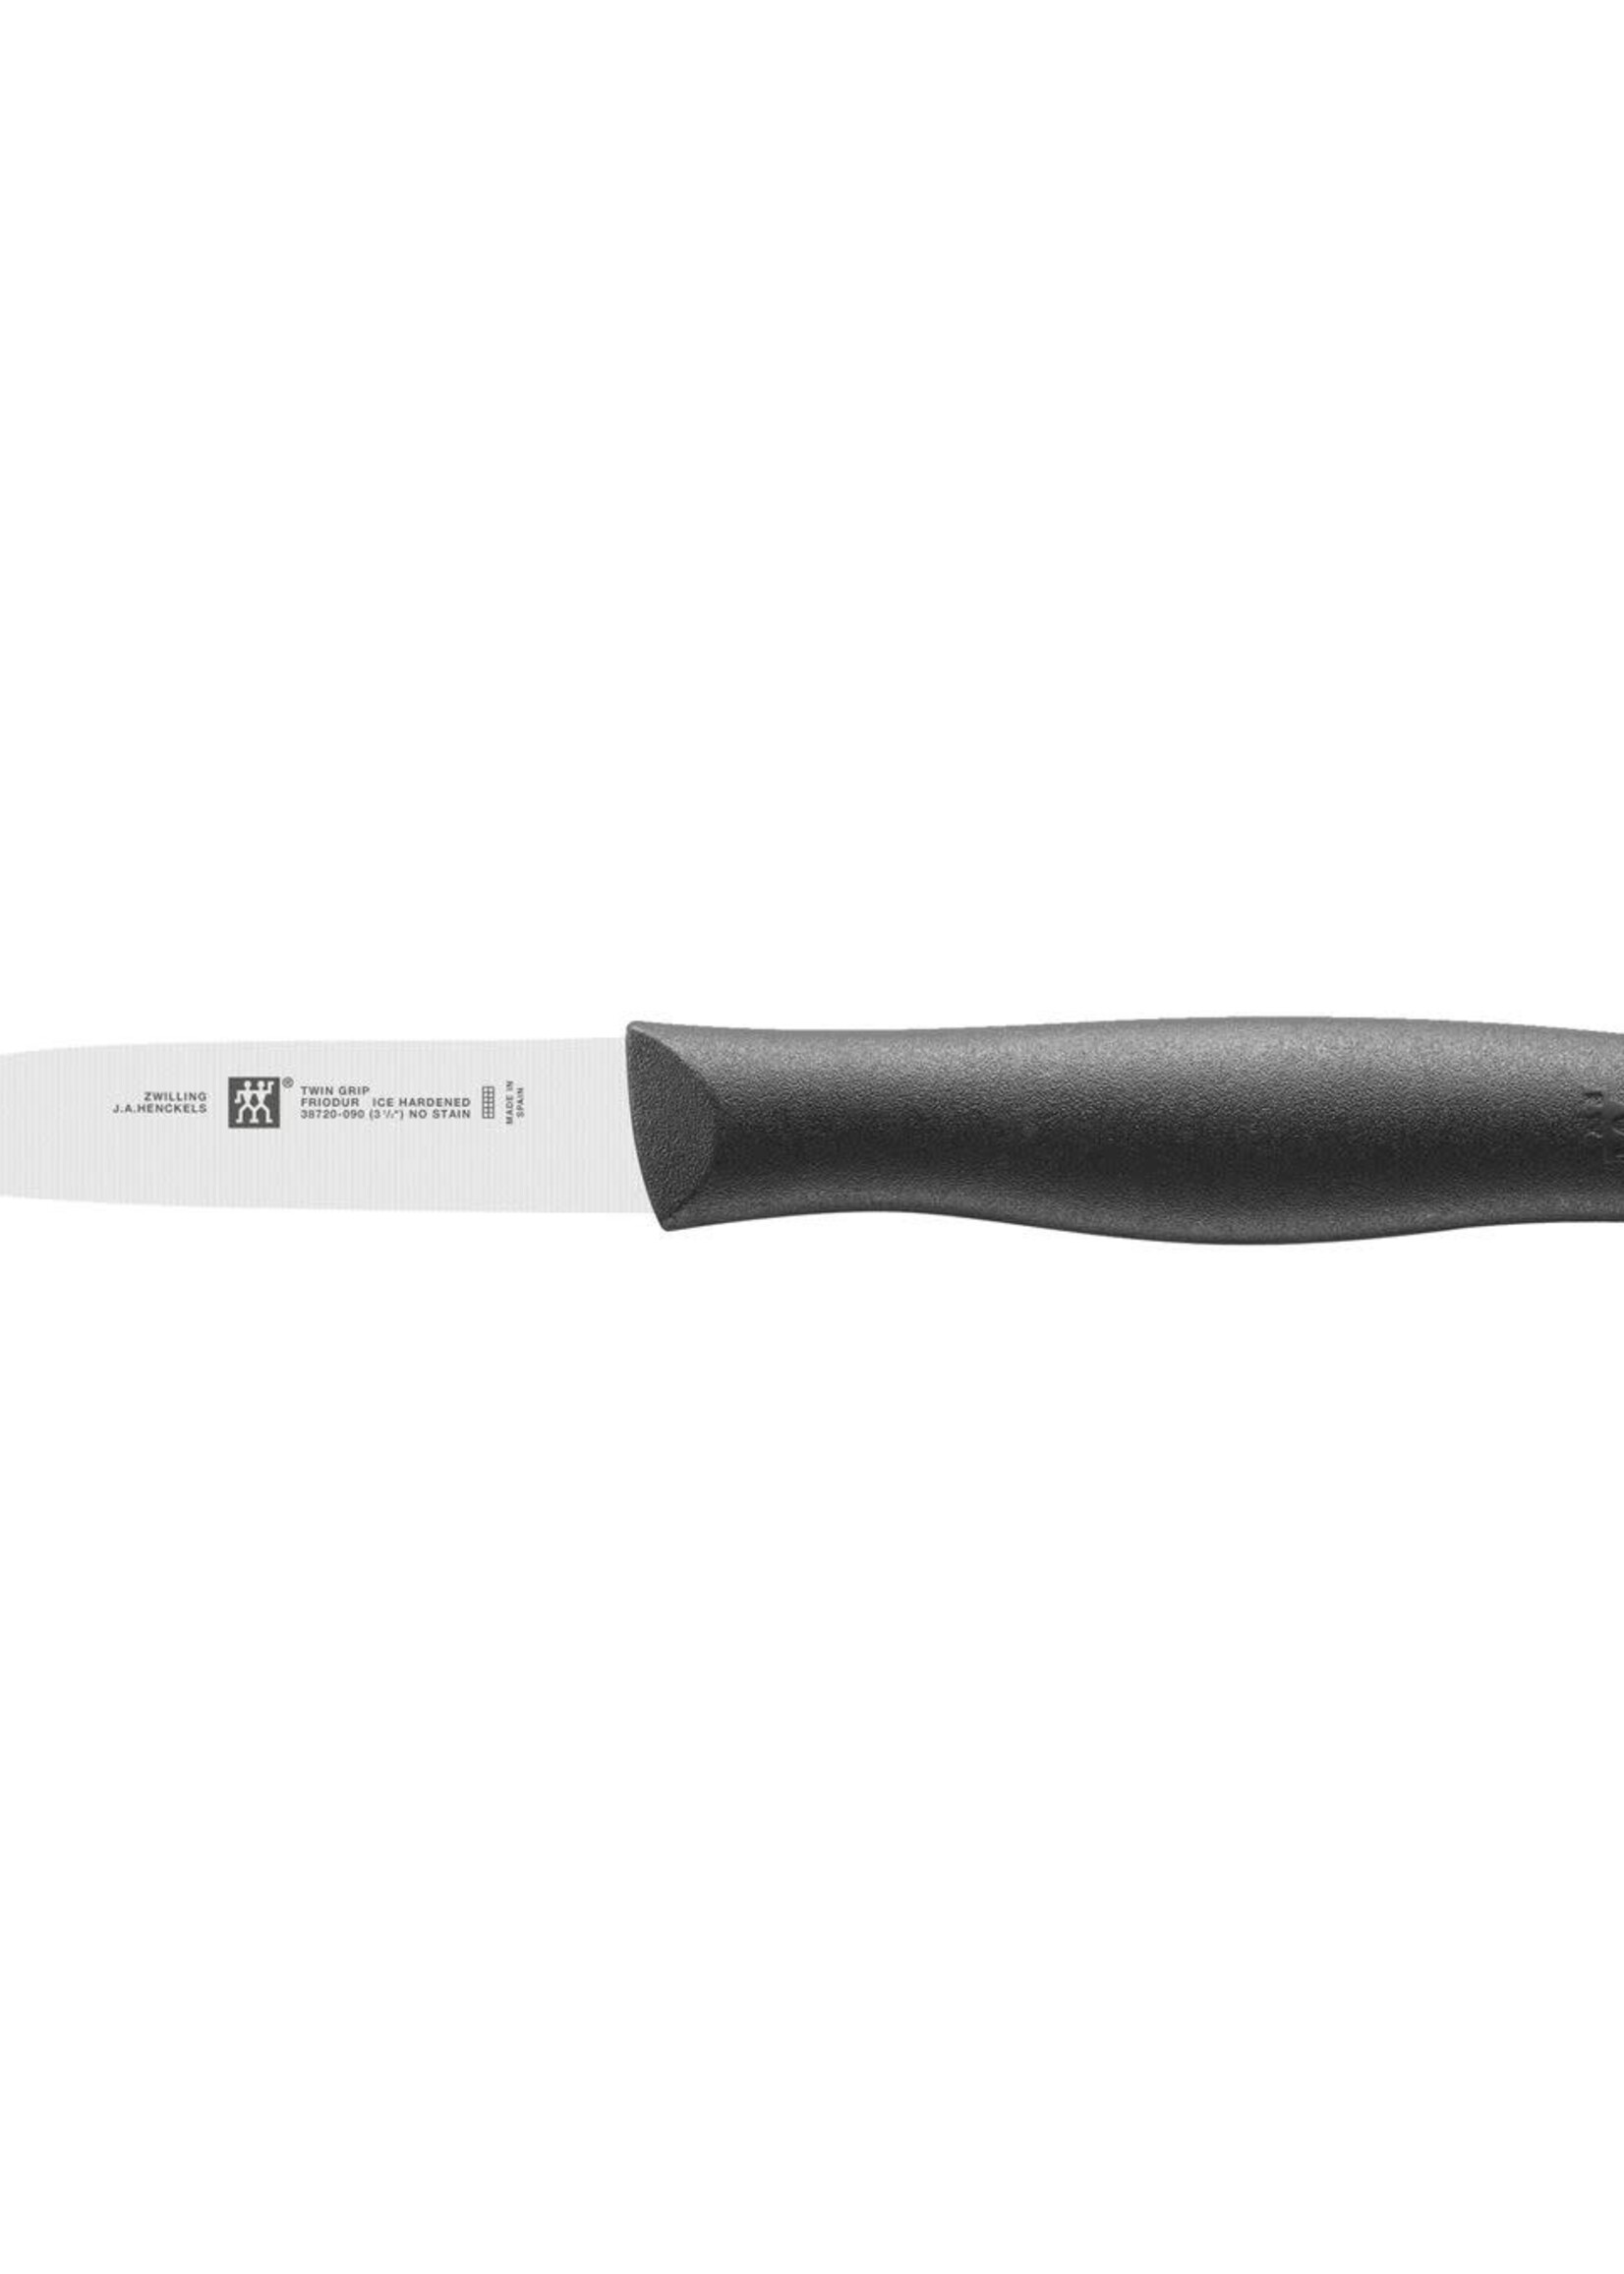 Zwilling Twin Grip